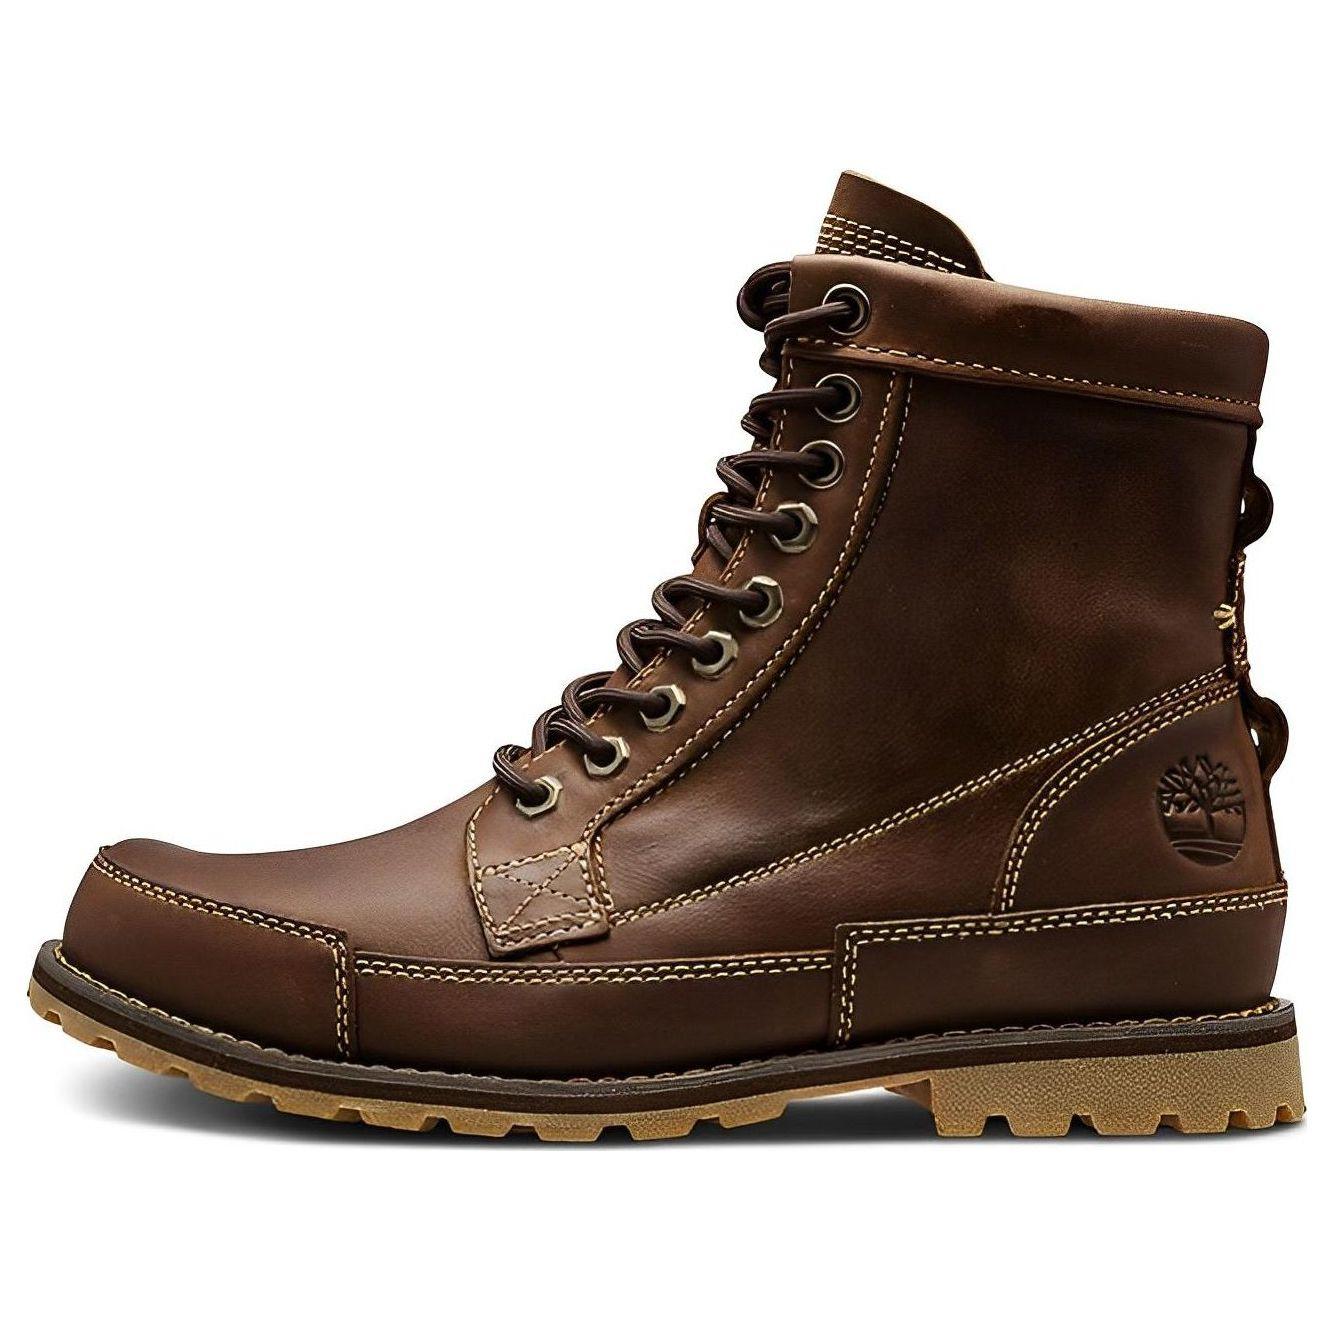 Timberland Earthkeepers Originals 6 Inch Narrow Fit 15551W